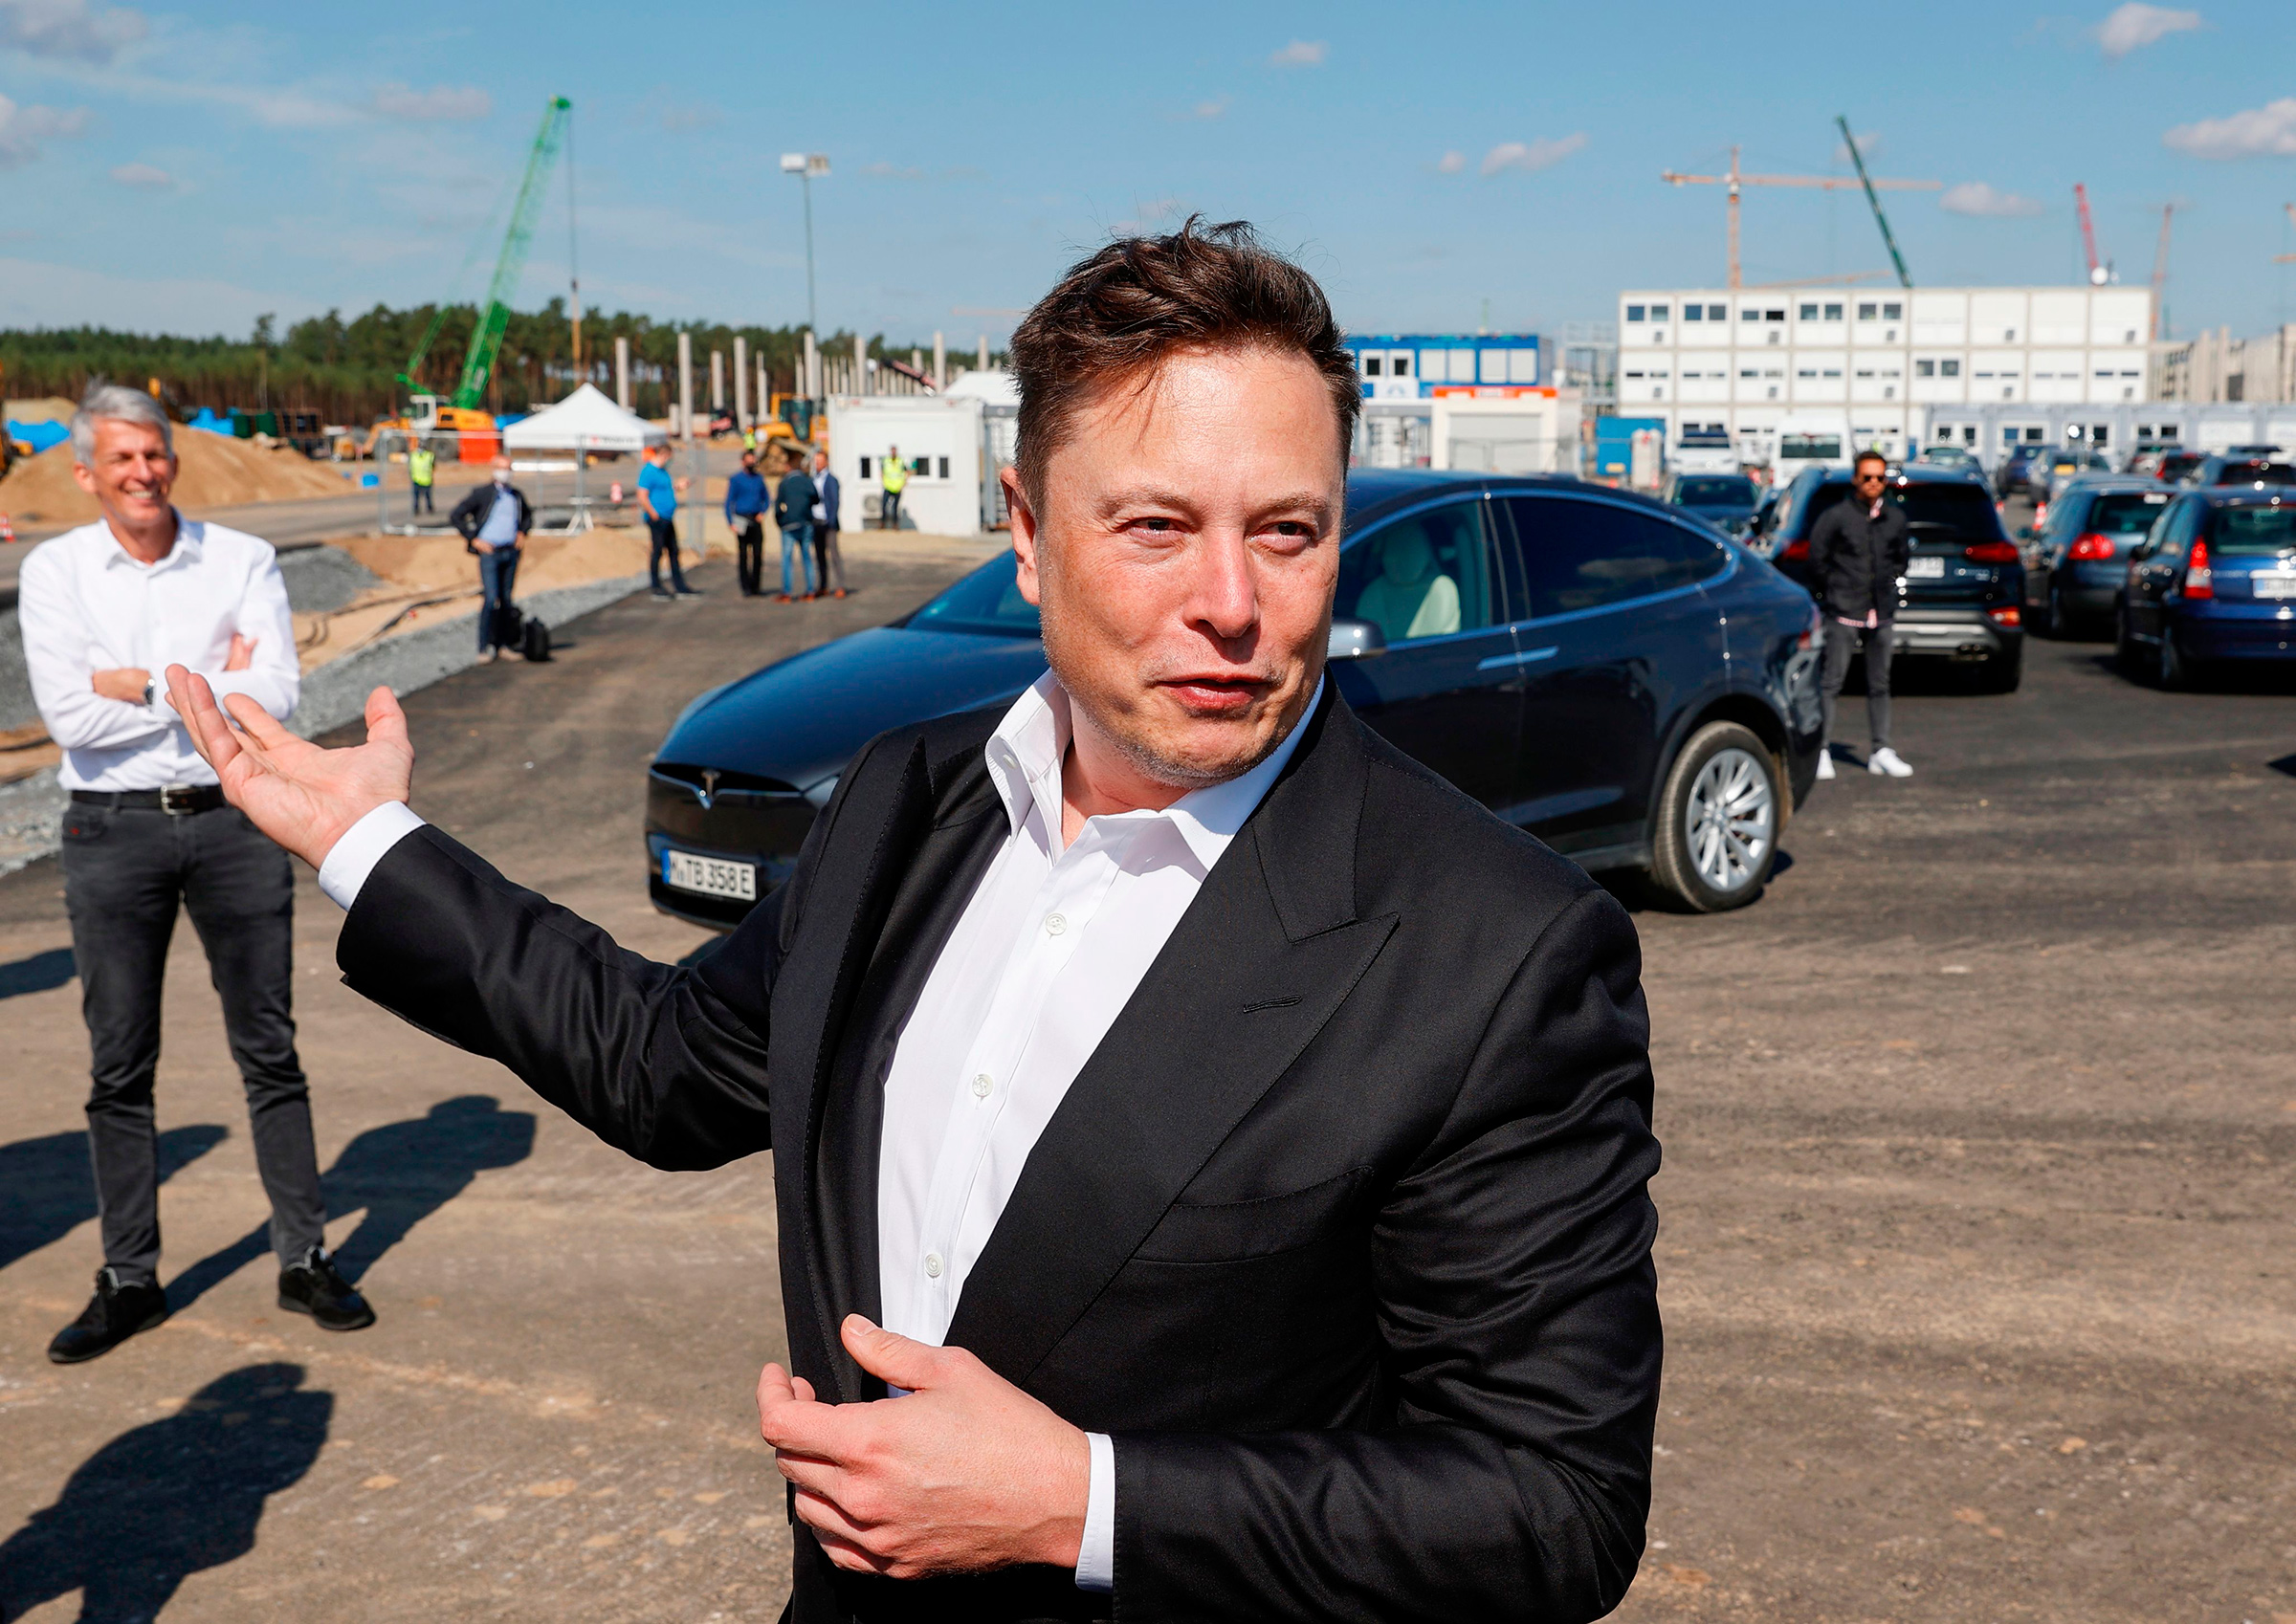 Tesla CEO Elon Musk talks to media as he arrives at a construction site in September, 2020. (Odd Andersen—AFP/Getty Images)